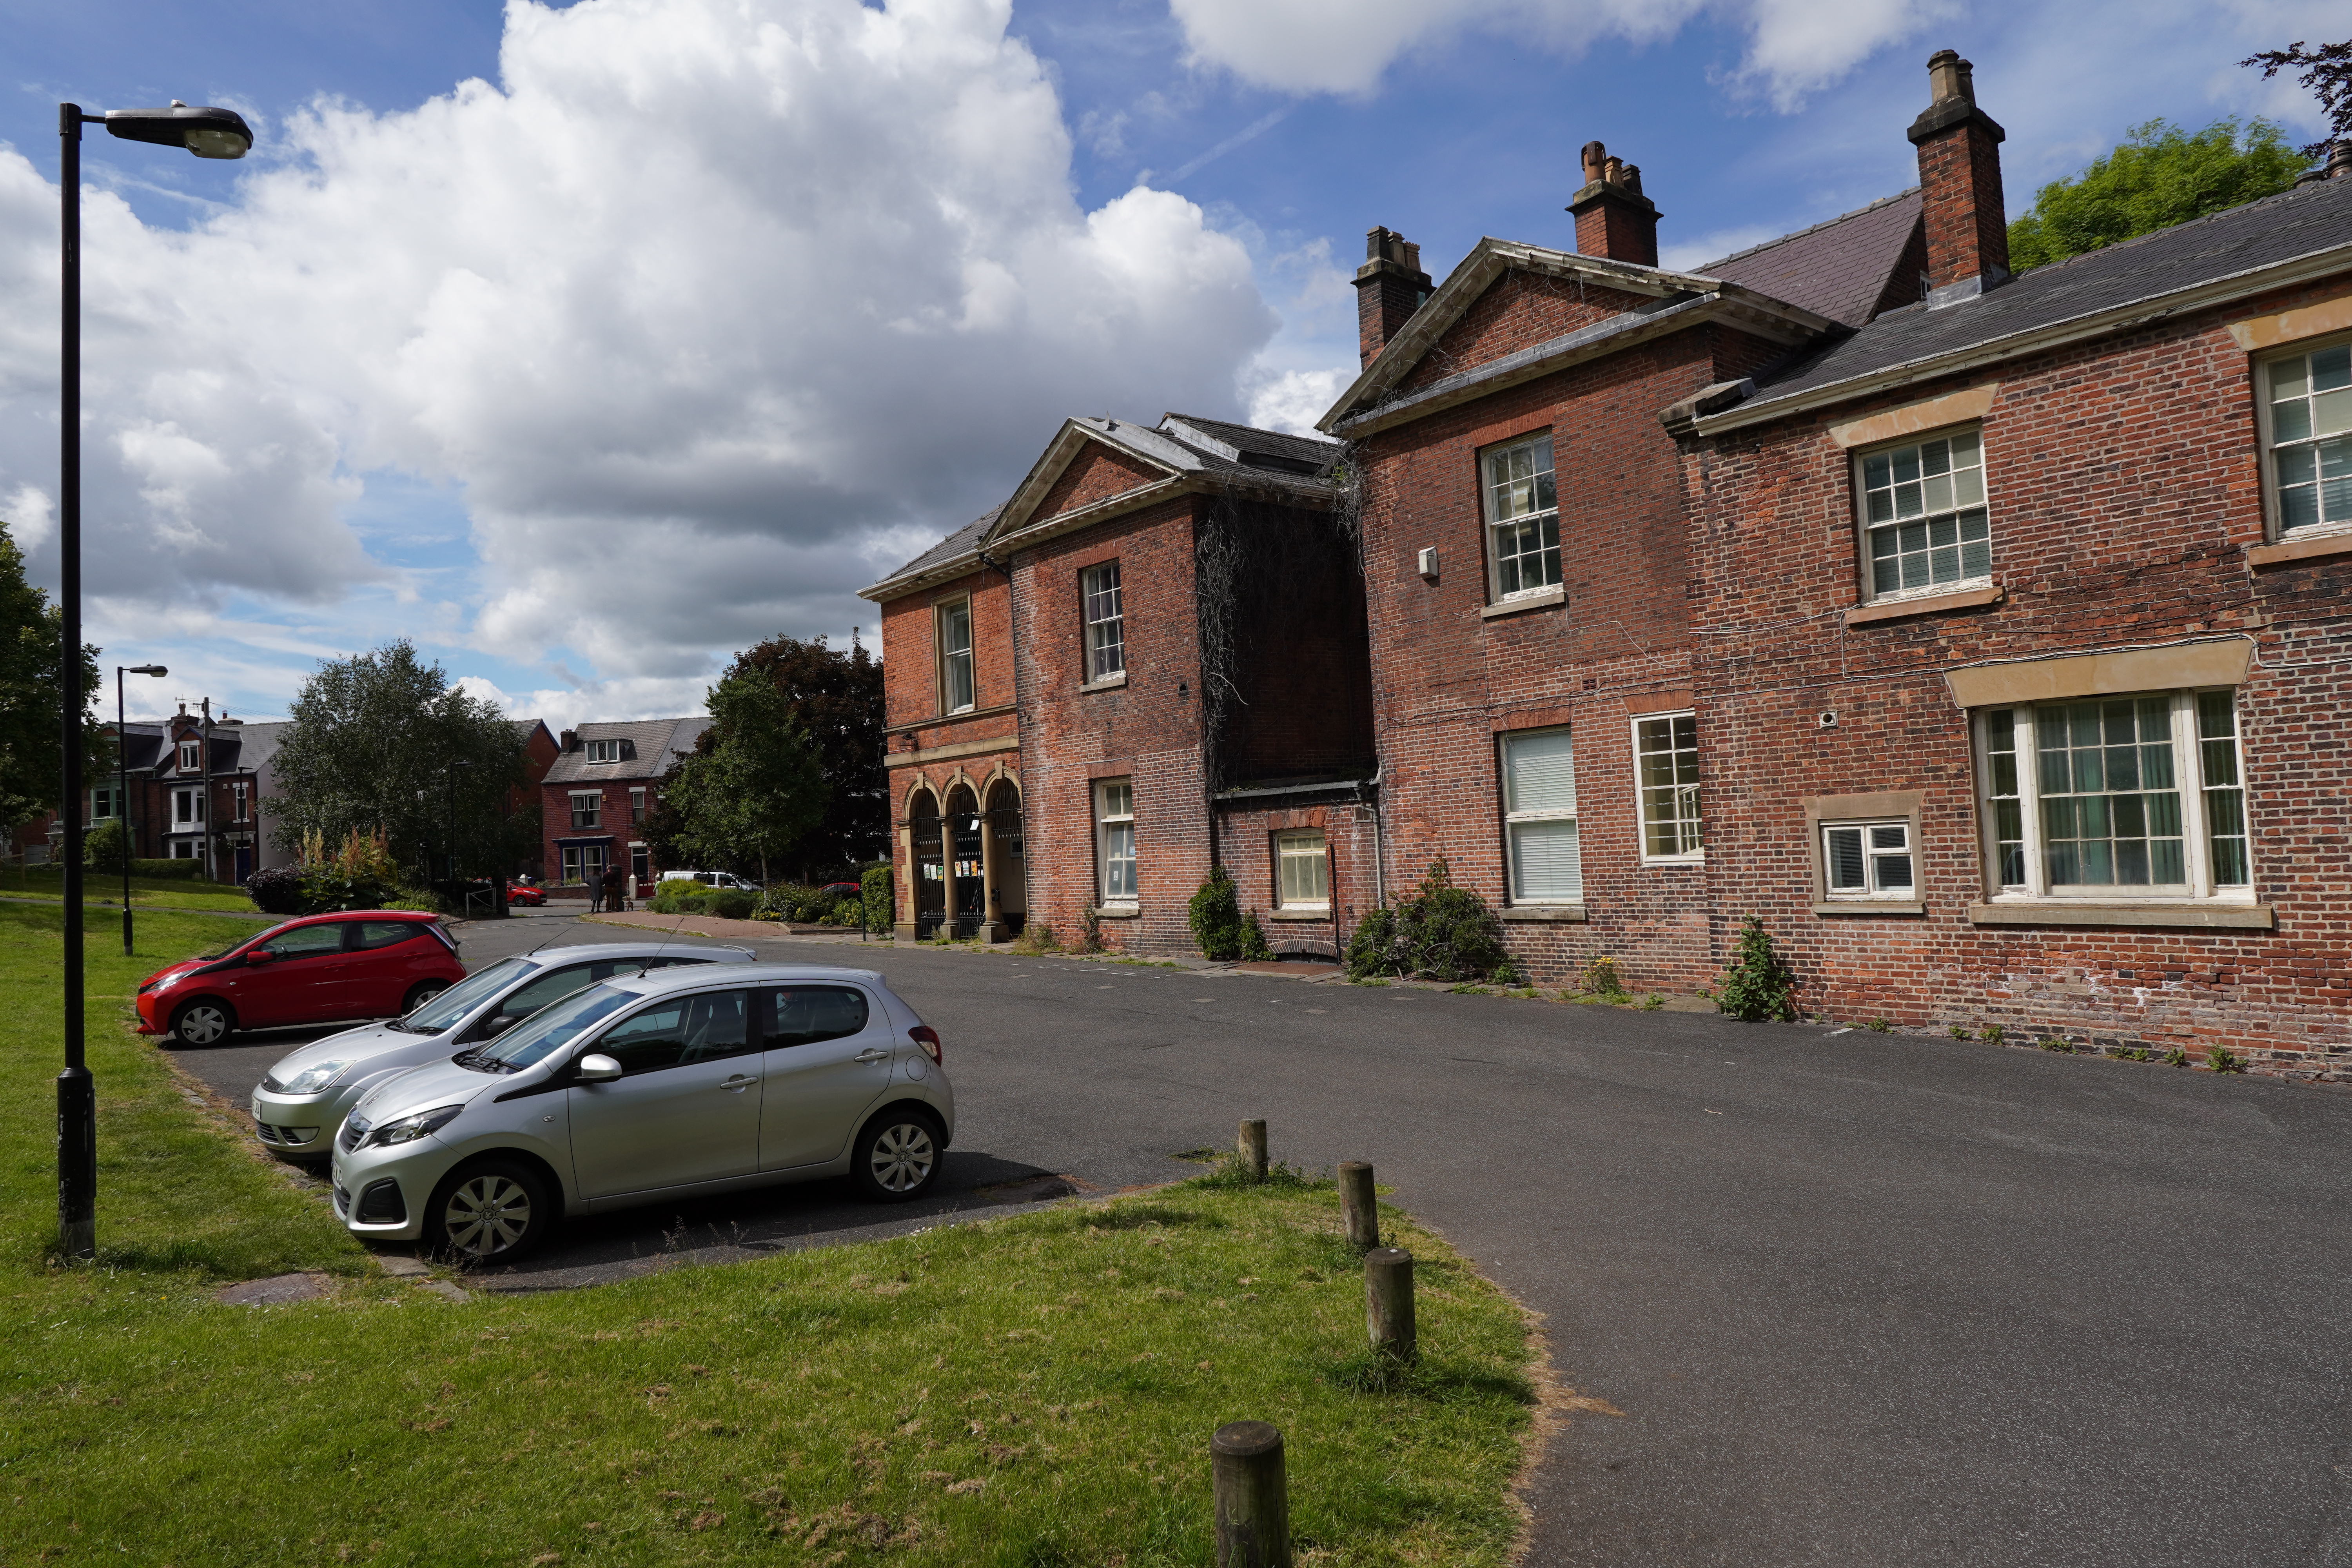 Detailed architecture (Meersbrook Hall), Sony E 15mm F1.4 G, 1/500s, F8, ISO100